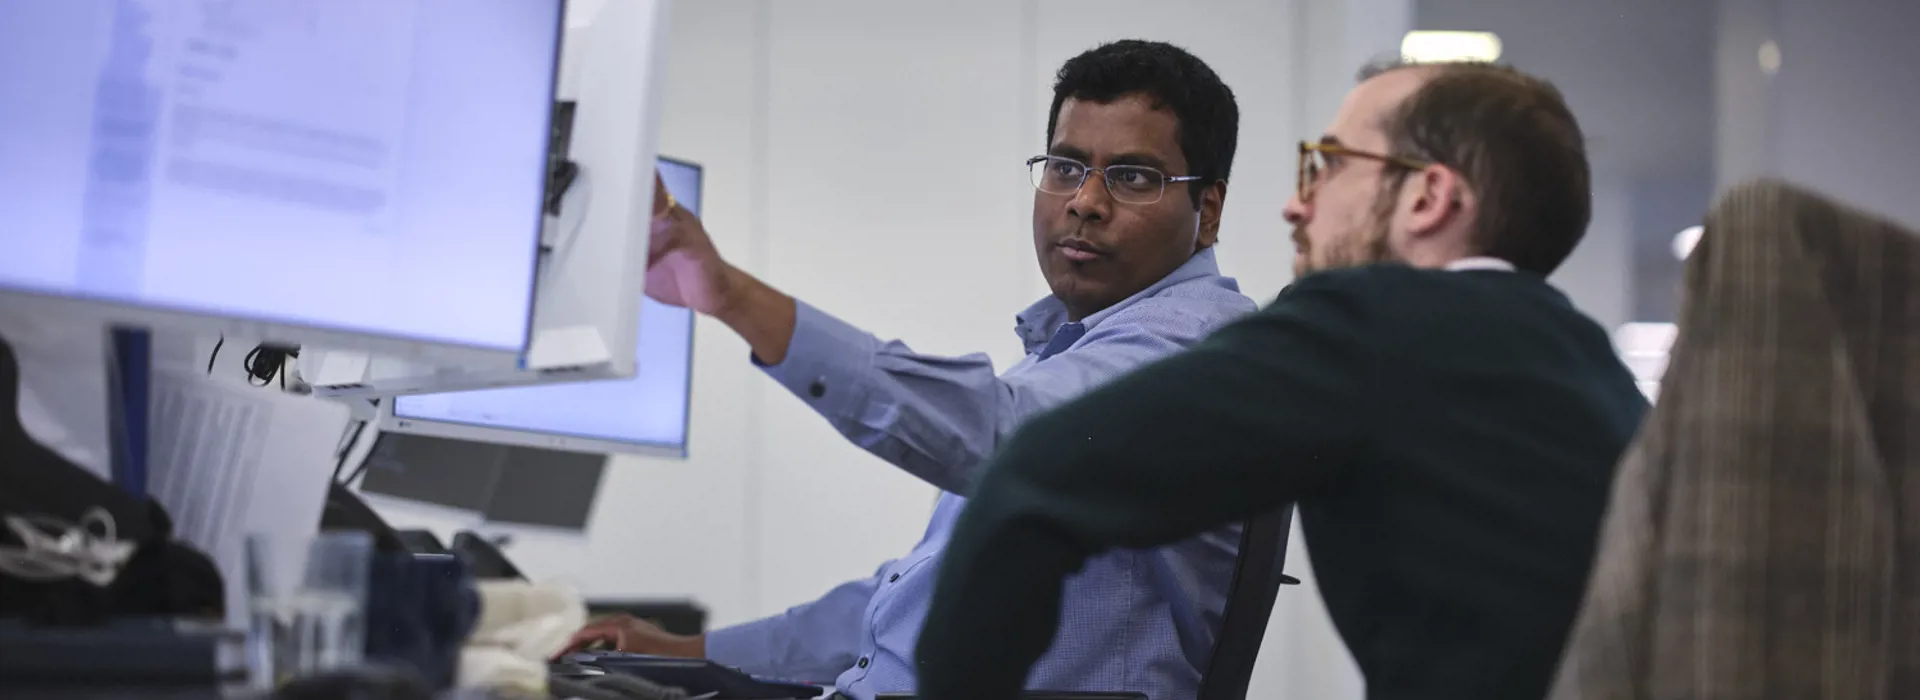 man pointing at his screen explaining to colleagues